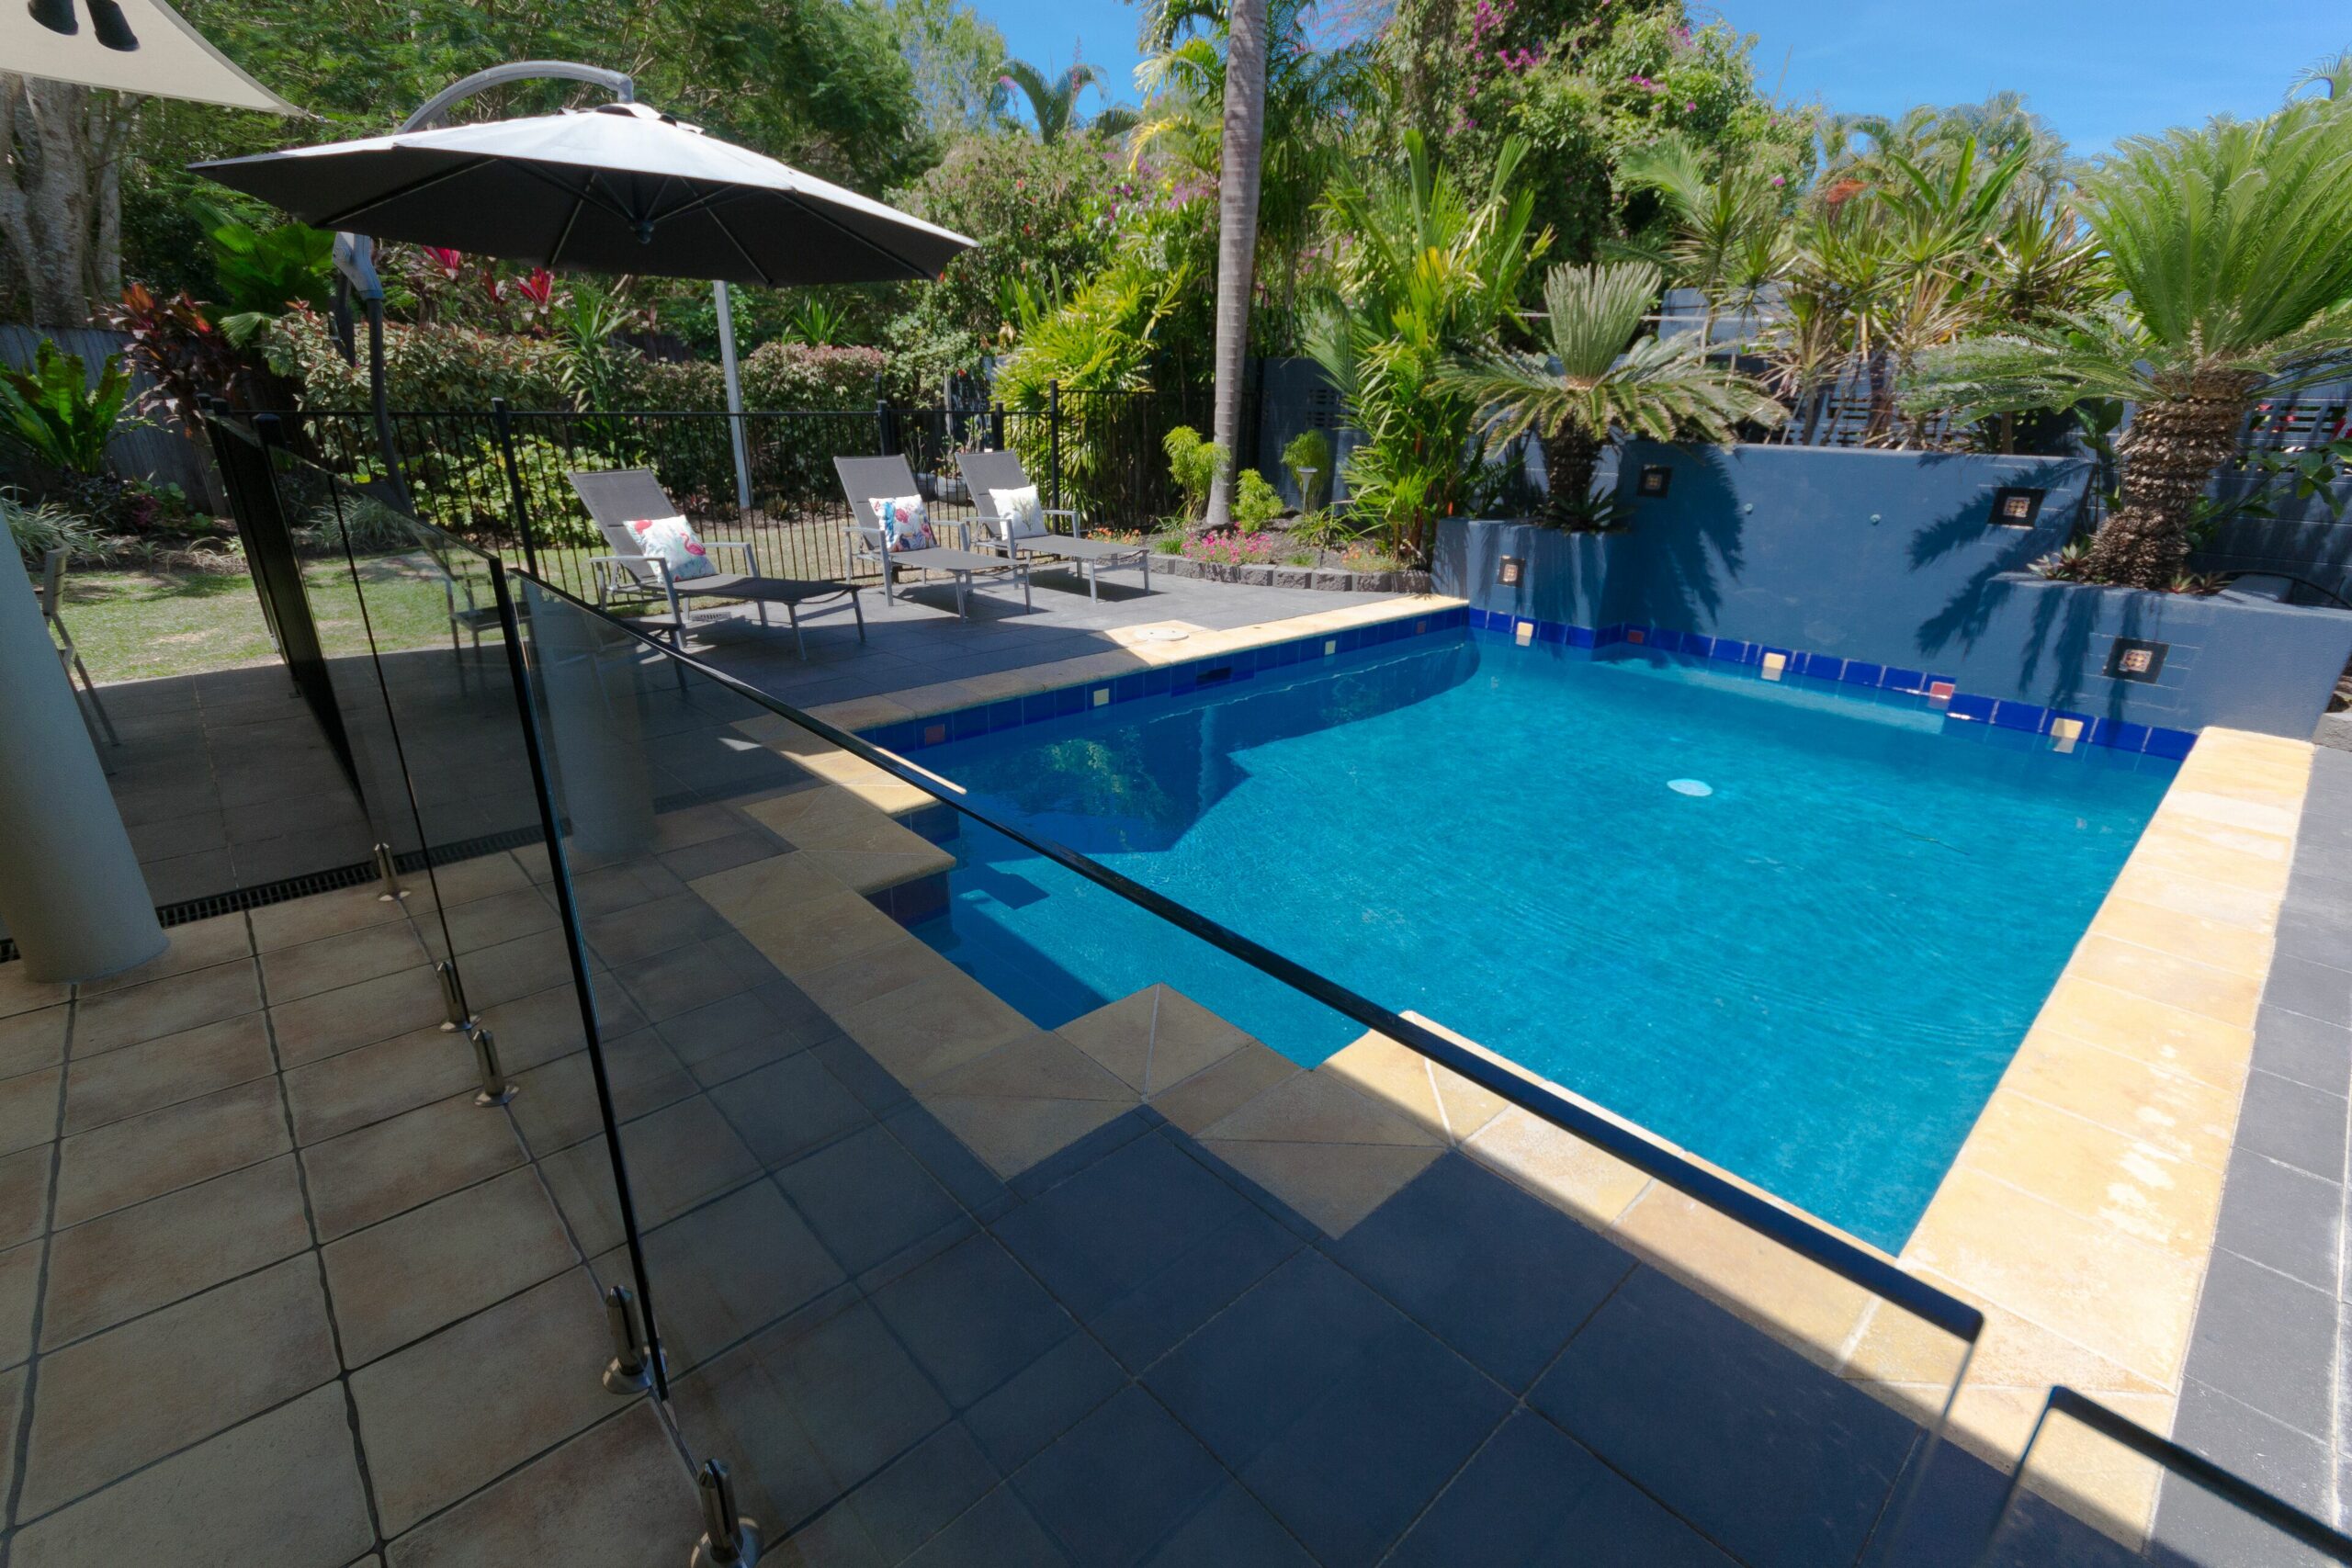 Villa Blue - Stay 5, Pay 4: 22 Jan - 31 Mar 21 - ask for this Special Deal